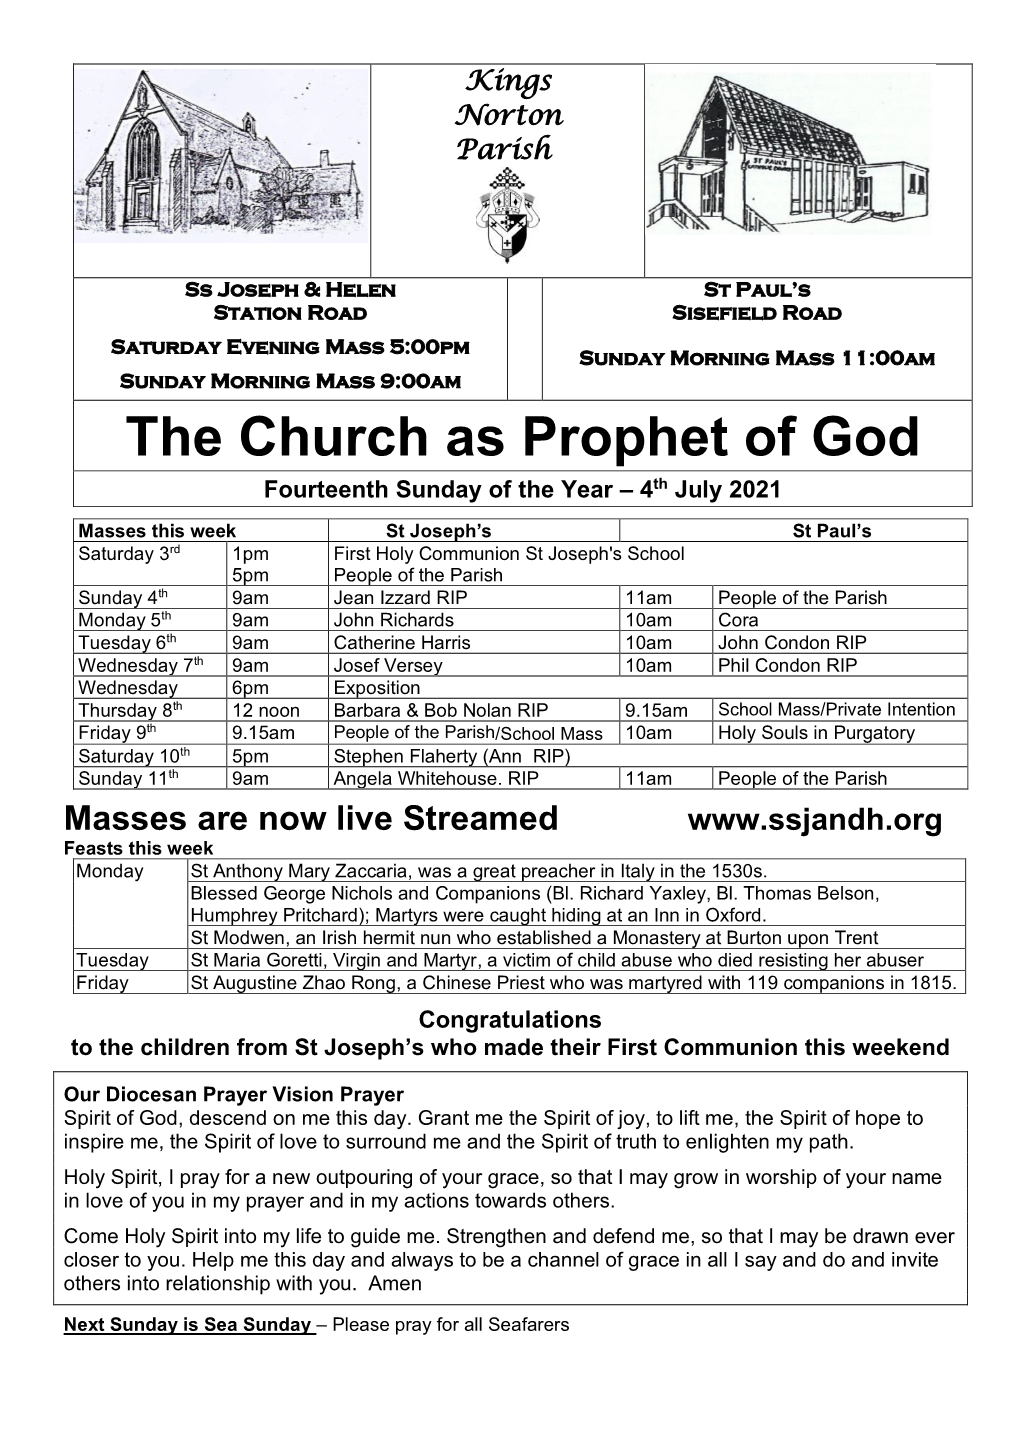 The Church As Prophet of God Fourteenth Sunday of the Year – 4Th July 2021